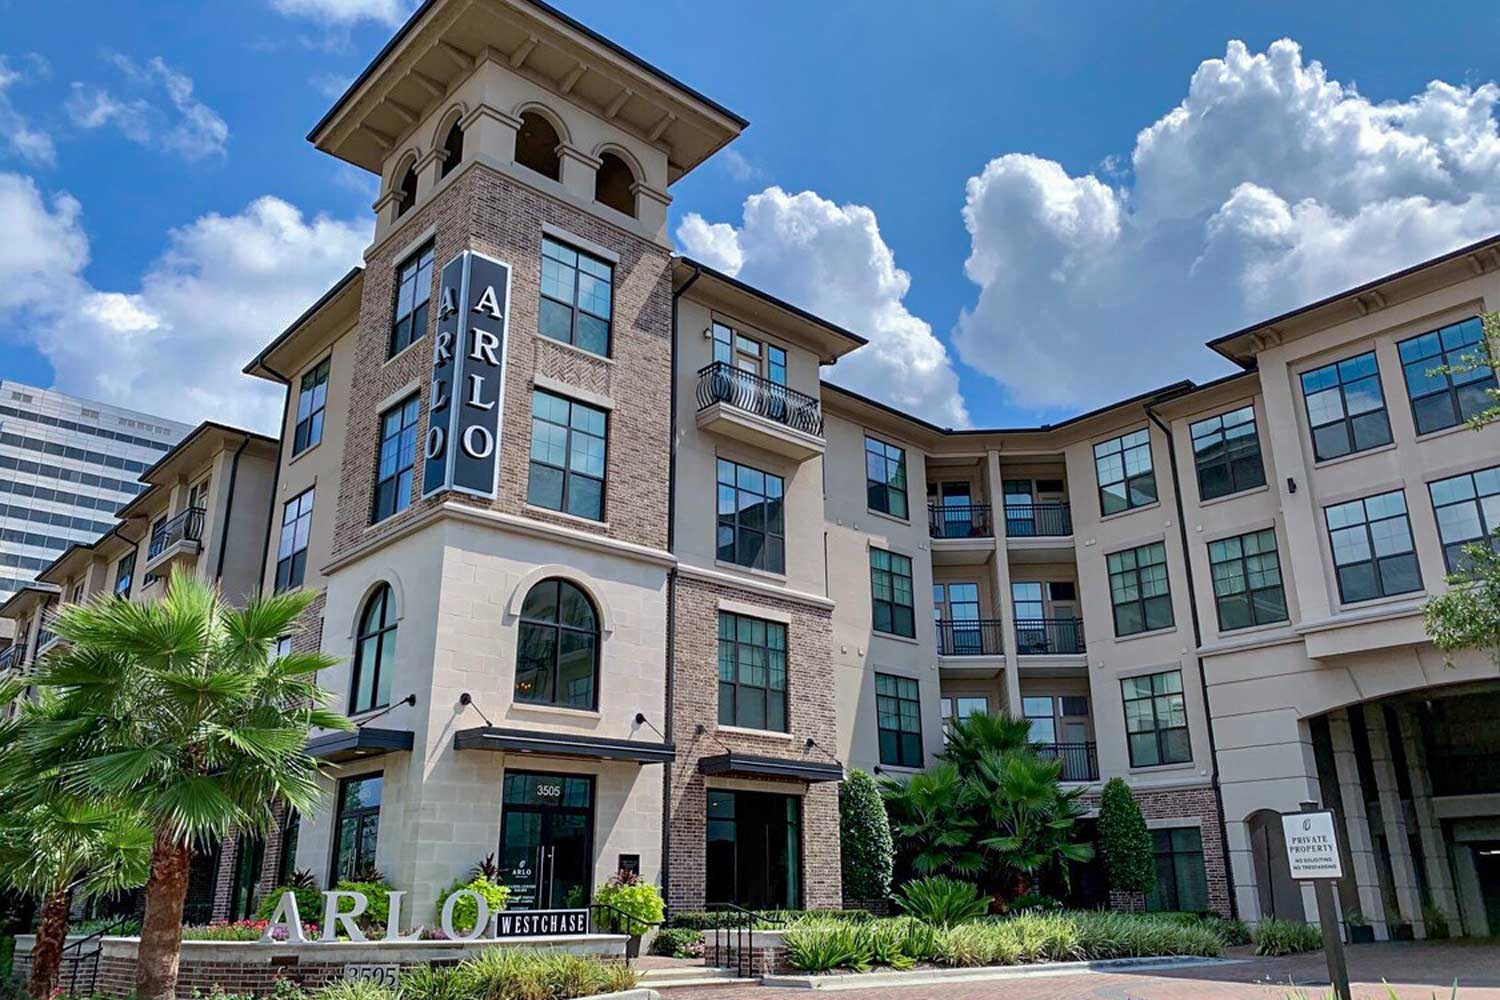 Arlo Westchase - affordable and essential housing in Houston.